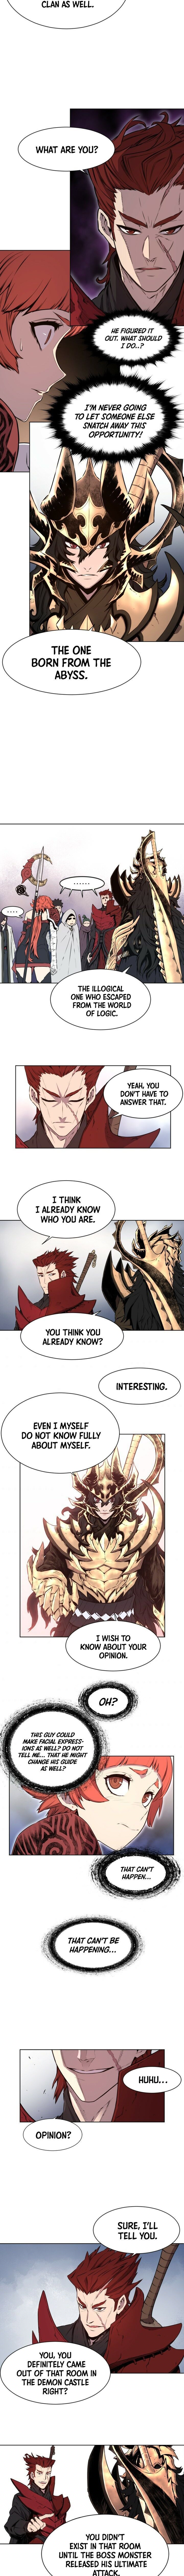 Legend of Mir: Gold Armored Sword Dragon Chapter 004 page 6